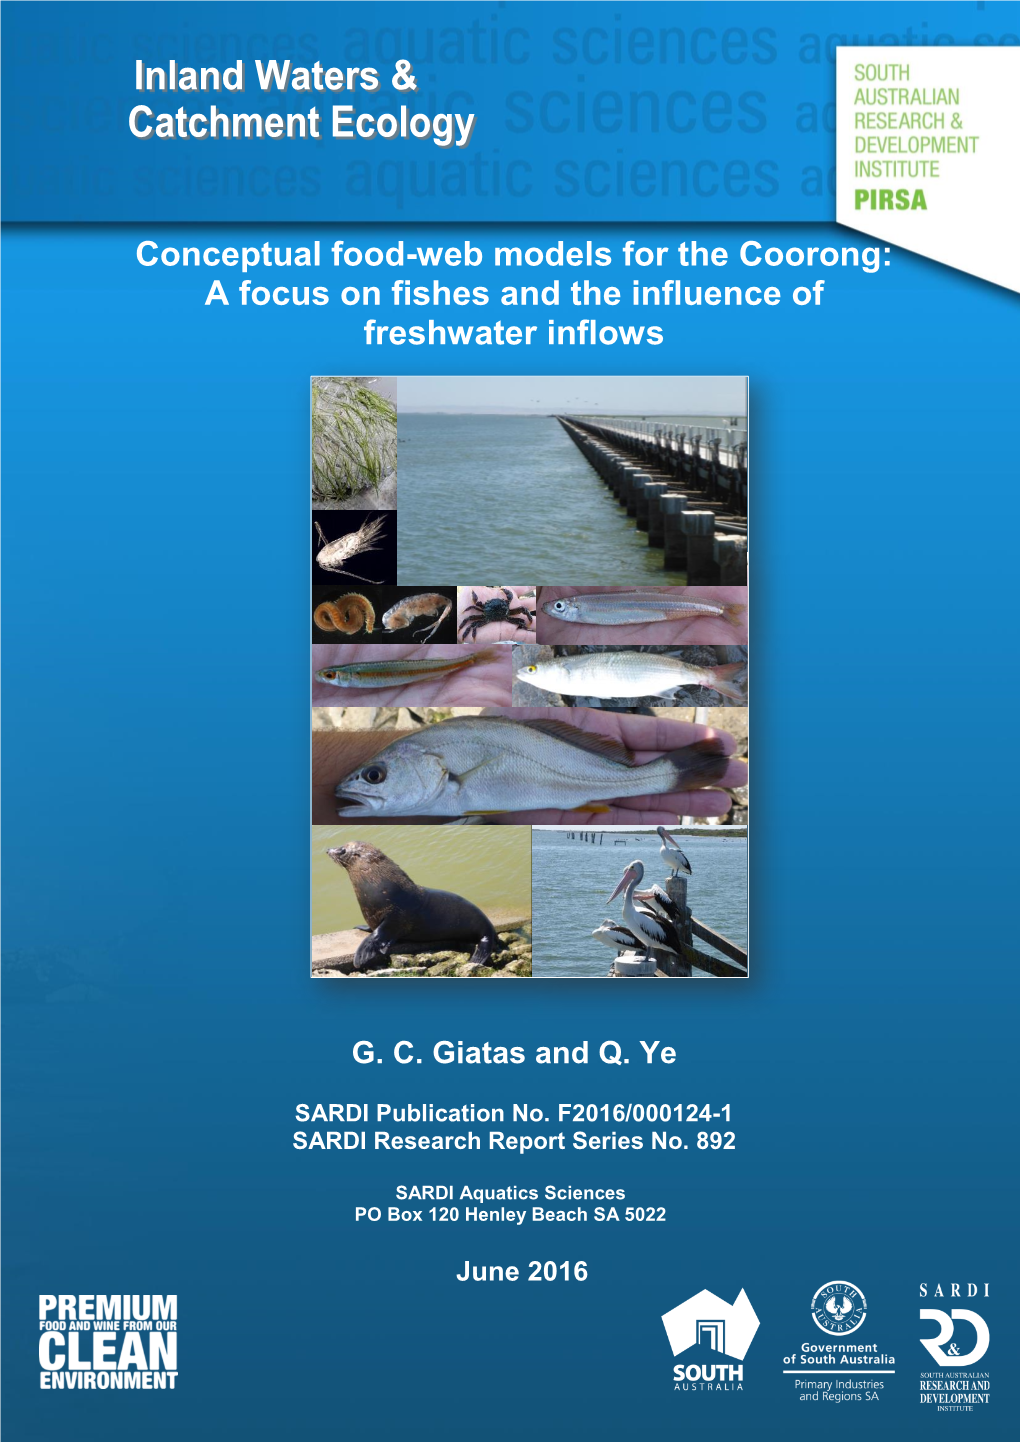 Conceptual Food-Web Models for the Coorong: a Focus on Fishes and the Influence of Freshwater Inflows